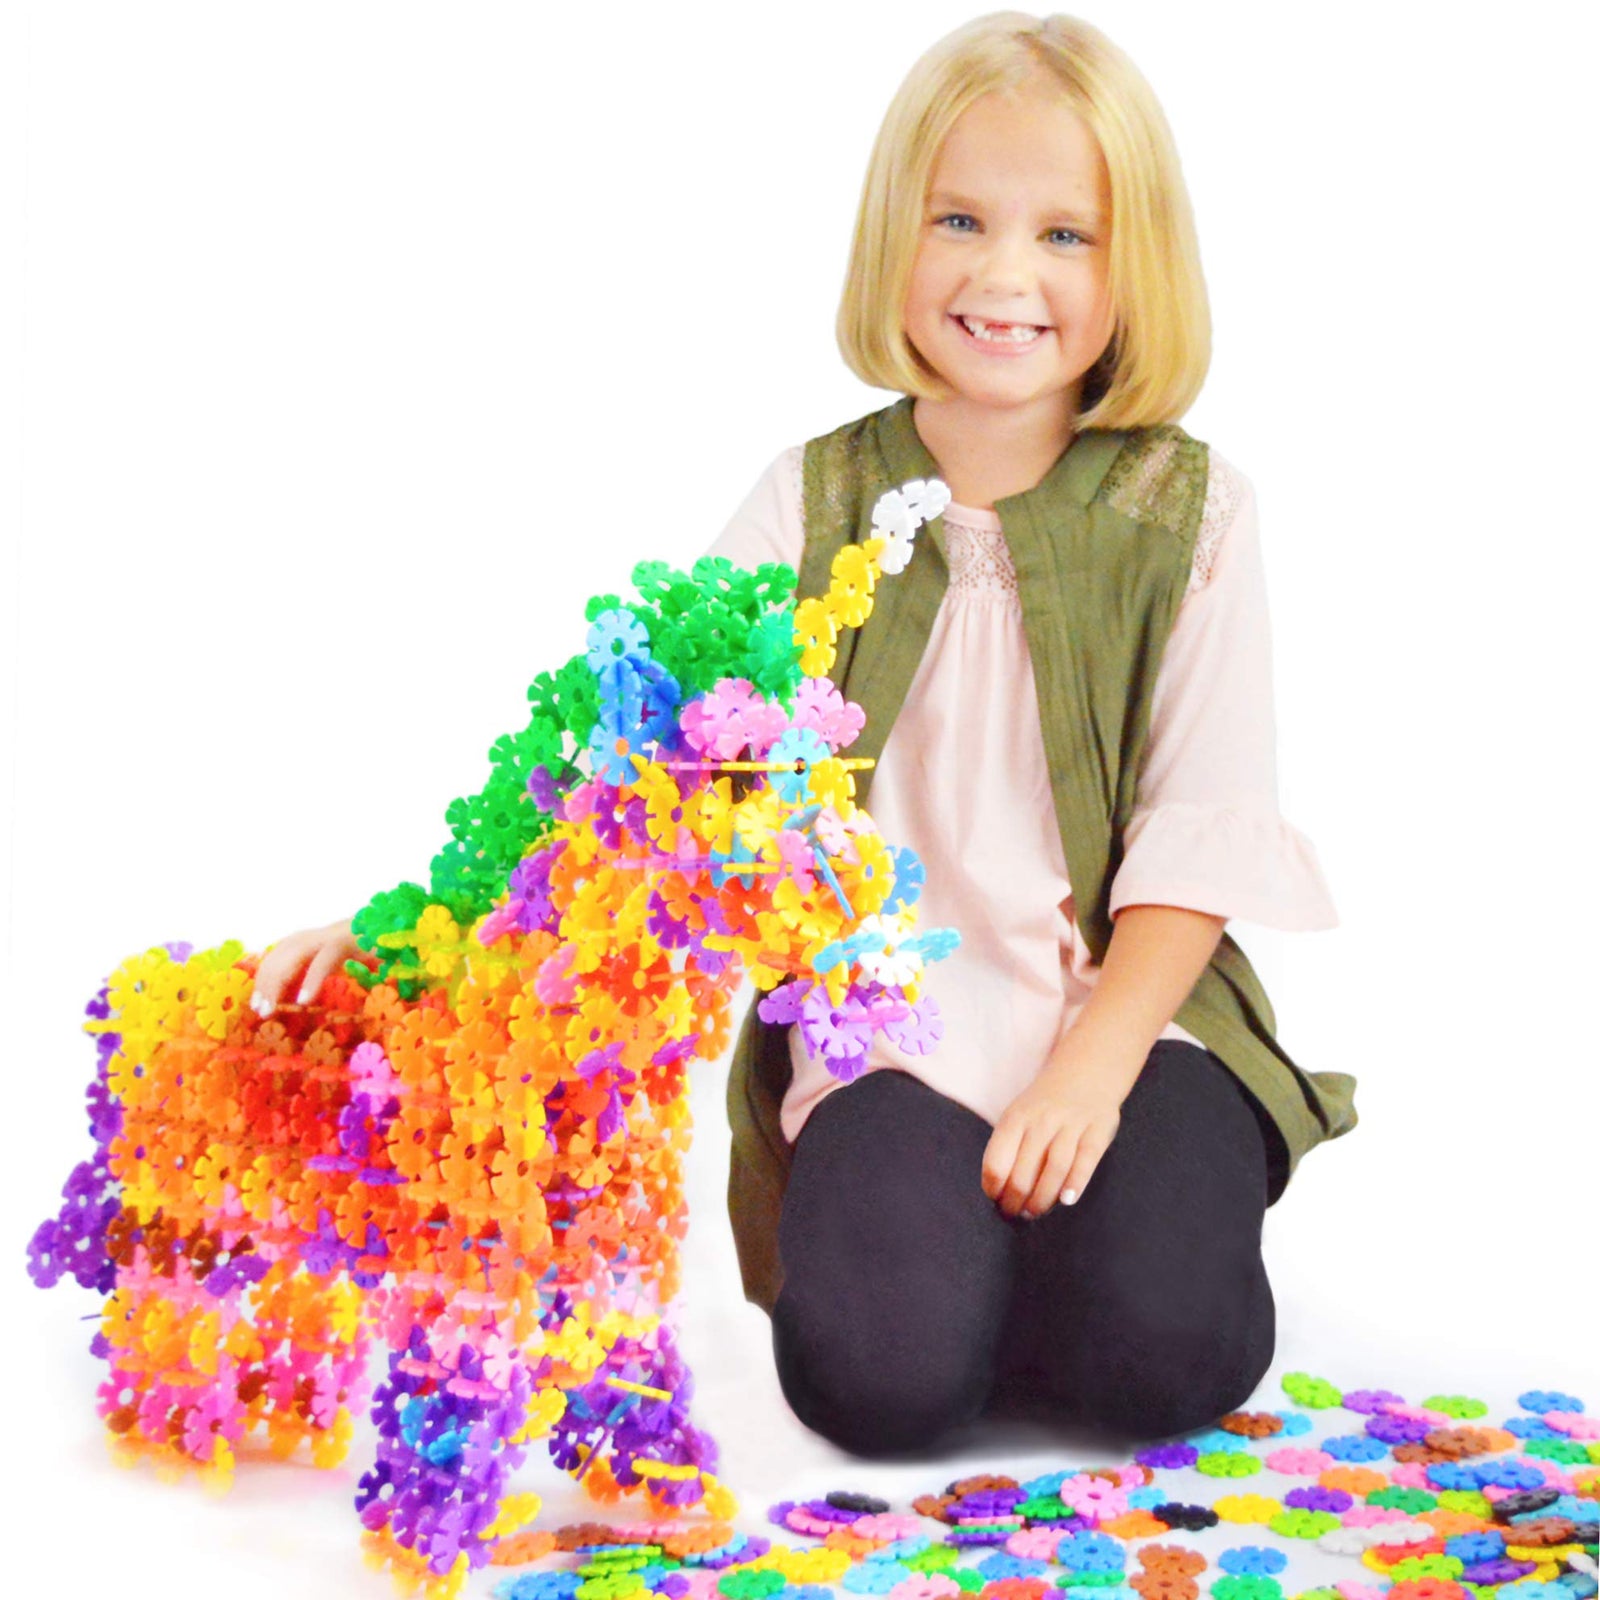 Brain Flakes 500 Piece Interlocking Plastic Disc Set - A Creative and Educational Alternative to Building Blocks - Tested for Children's Safety - A Great Stem Toy for Both Boys and Girls